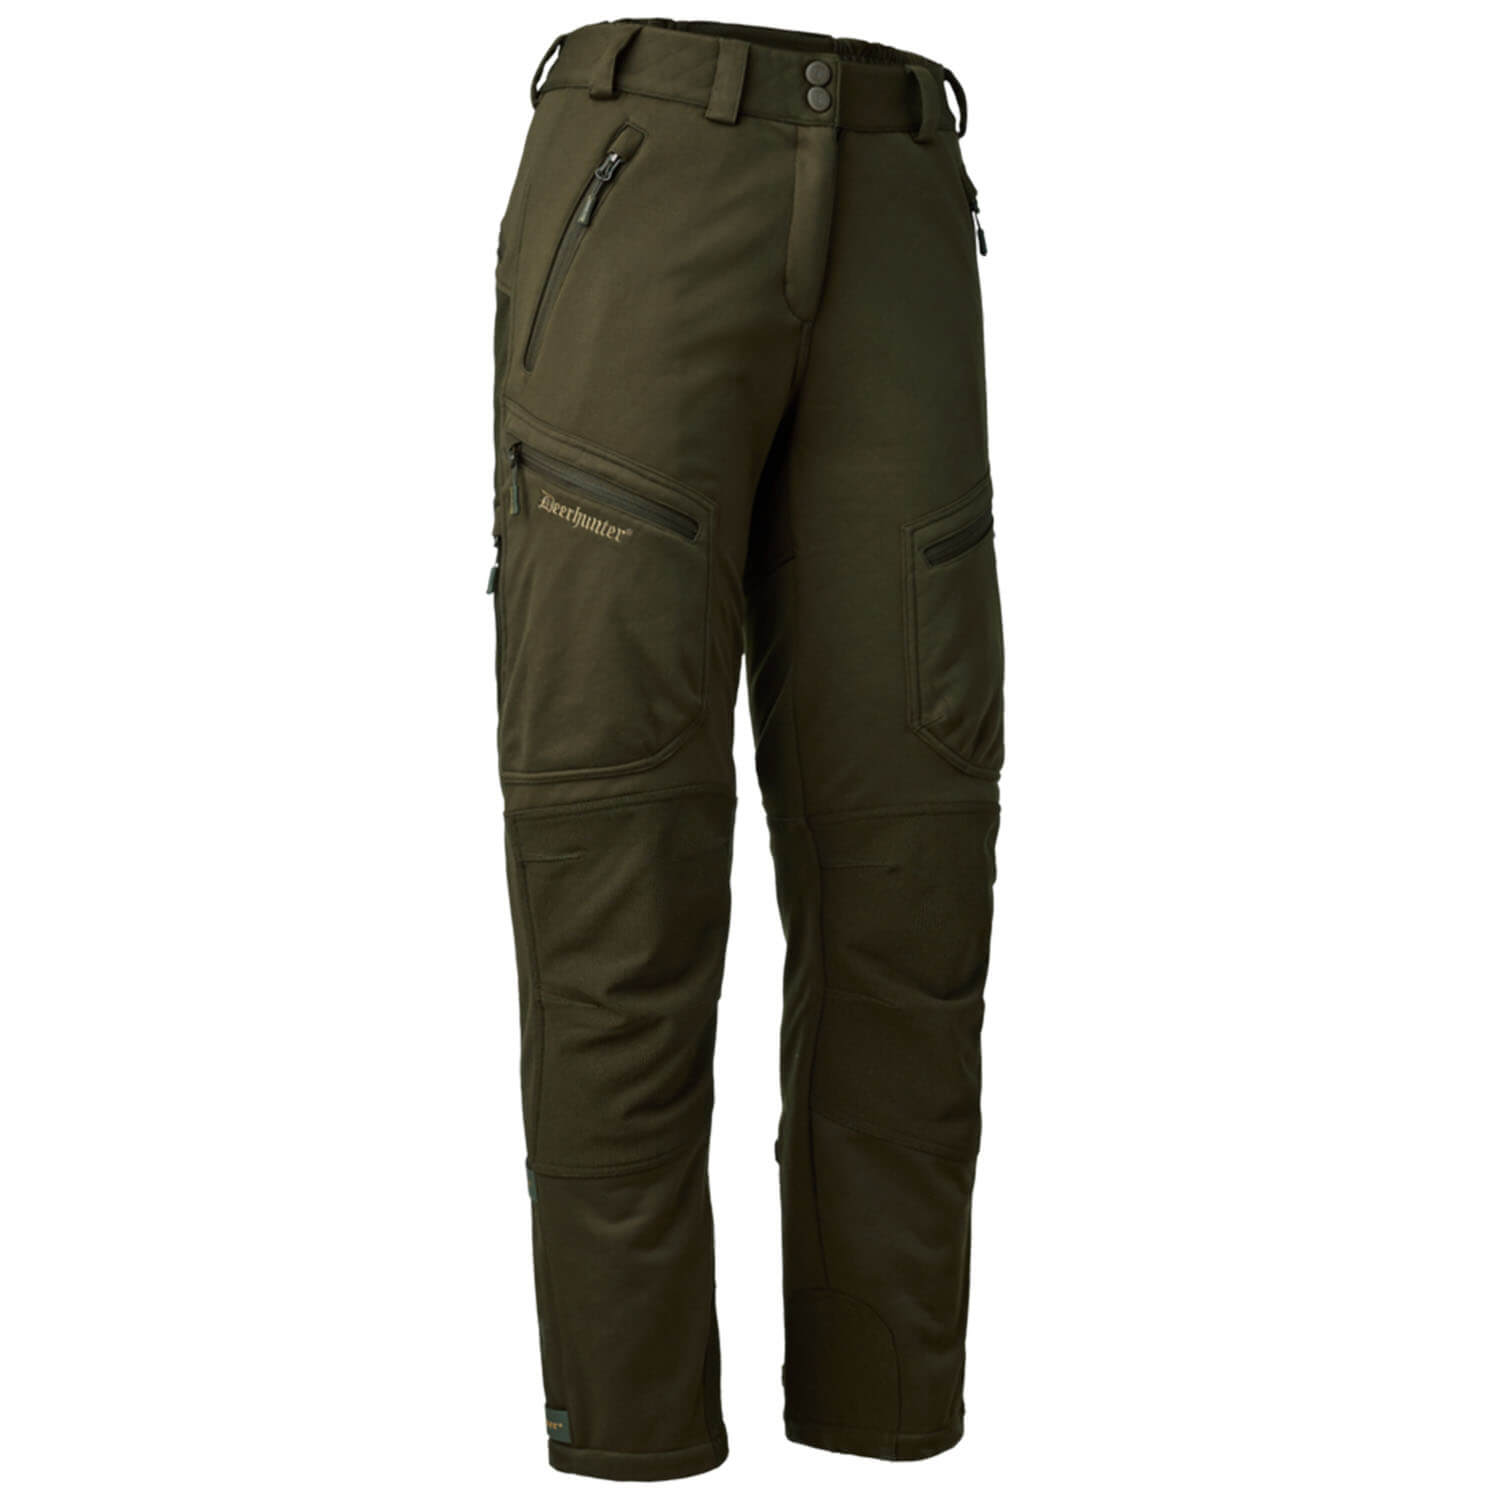 Deerhunter Softshell Trousers Lady Excape (green) - Hunting Trousers